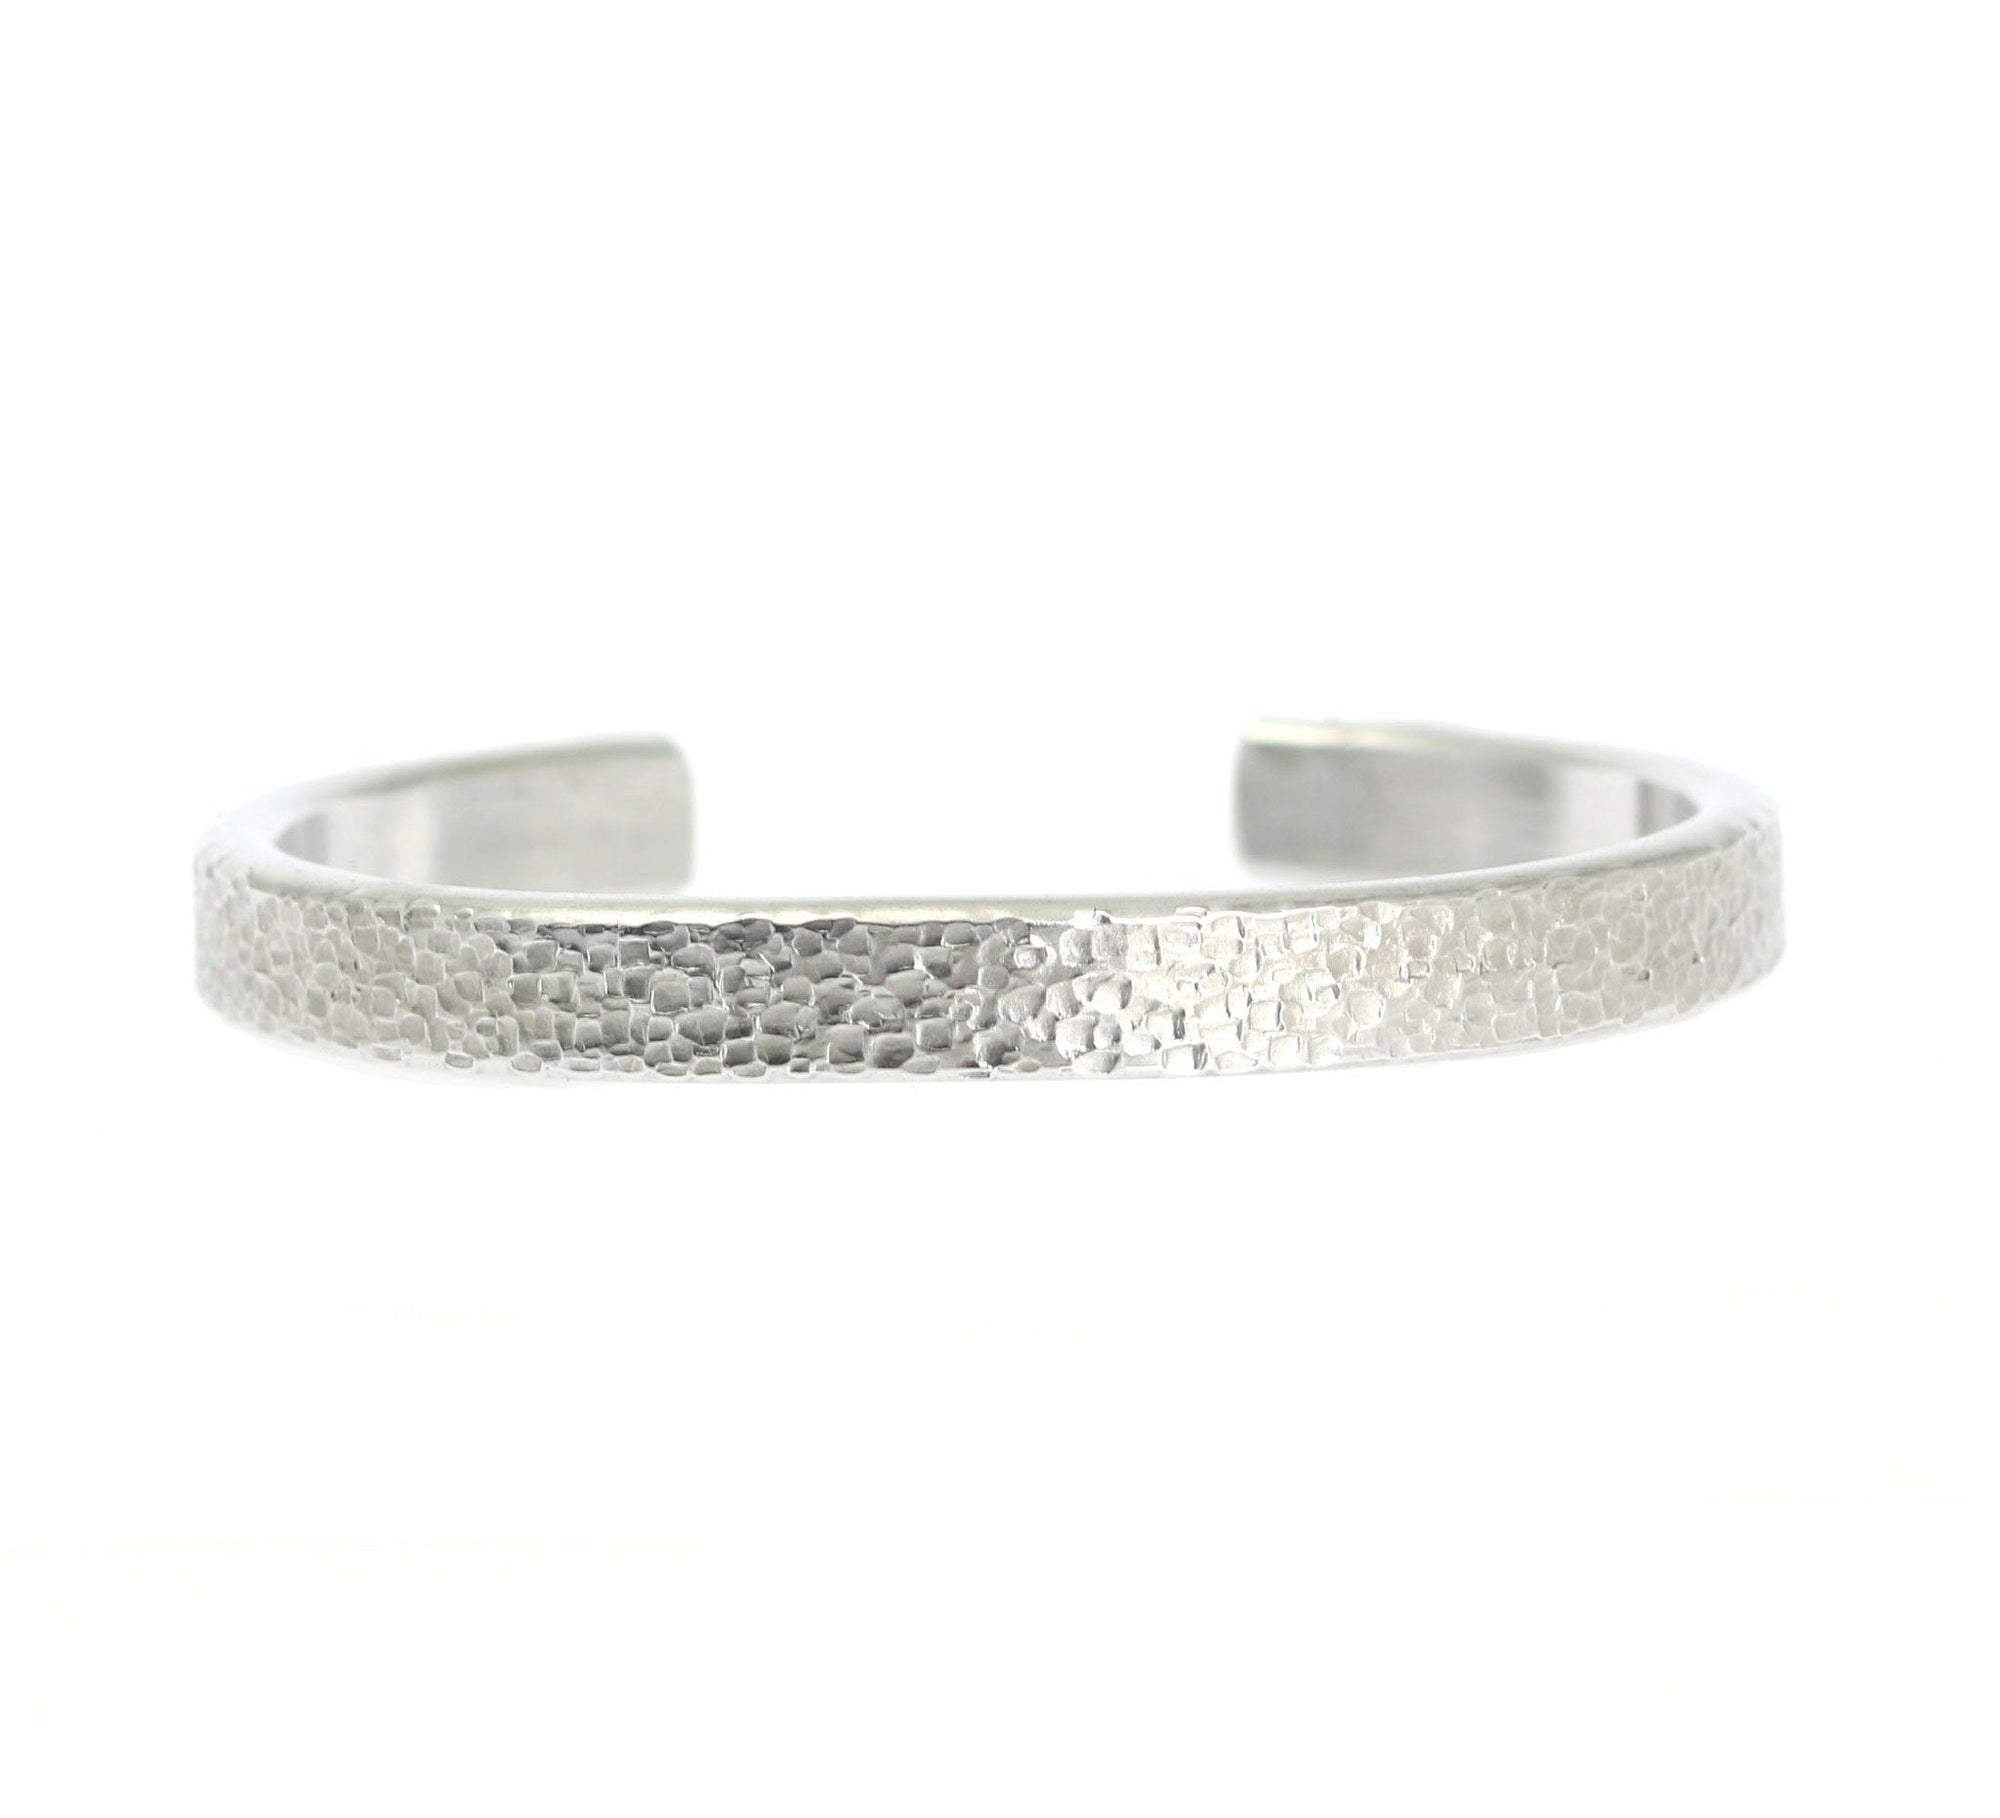 Detailed View of Thin Texturized Aluminum Cuff Bracelet